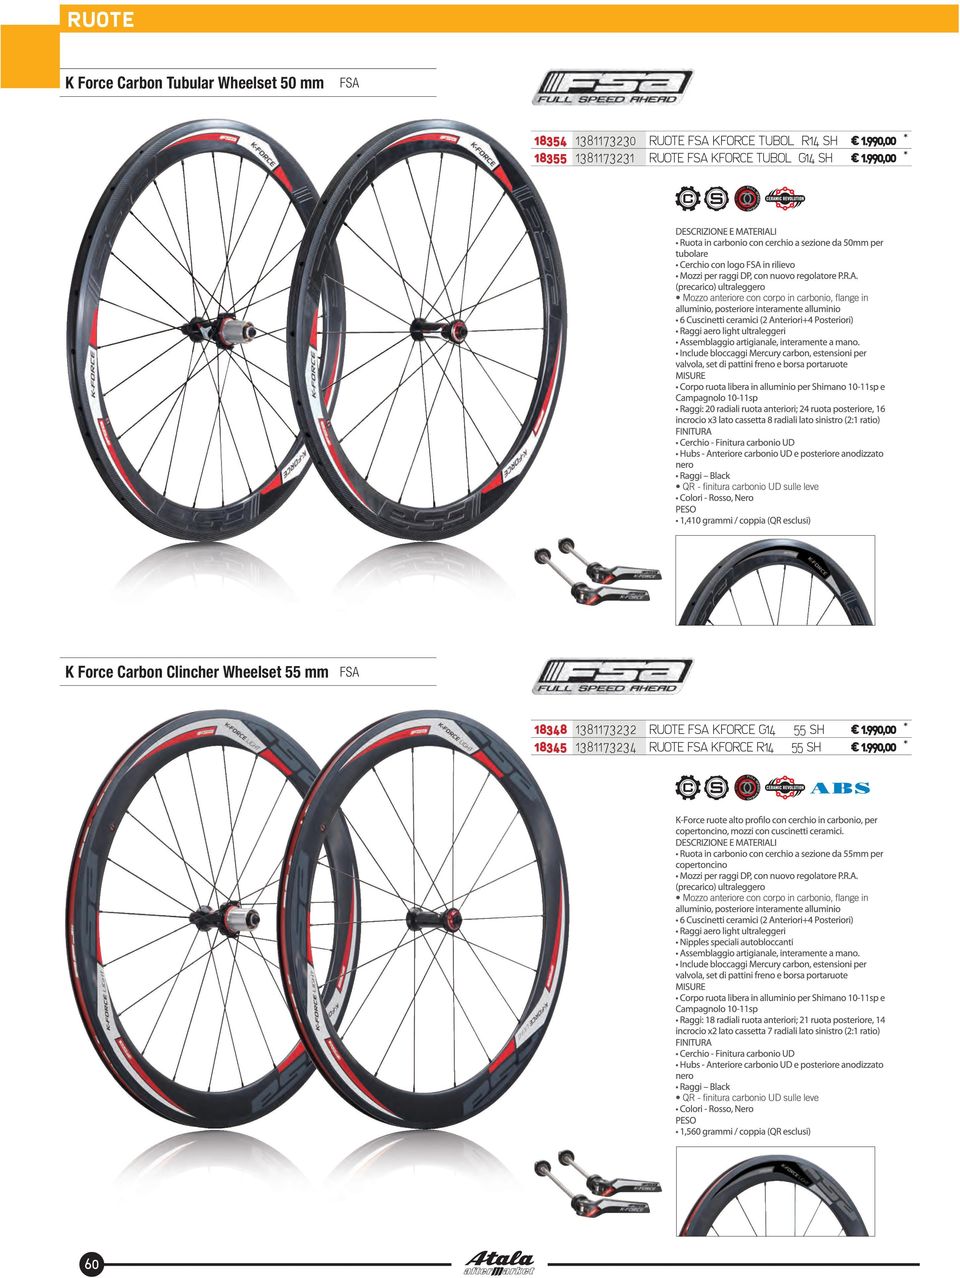 990,00 * K Force Carbon Clincher Wheelset 55 mm 18348 1381173232 RUOTE